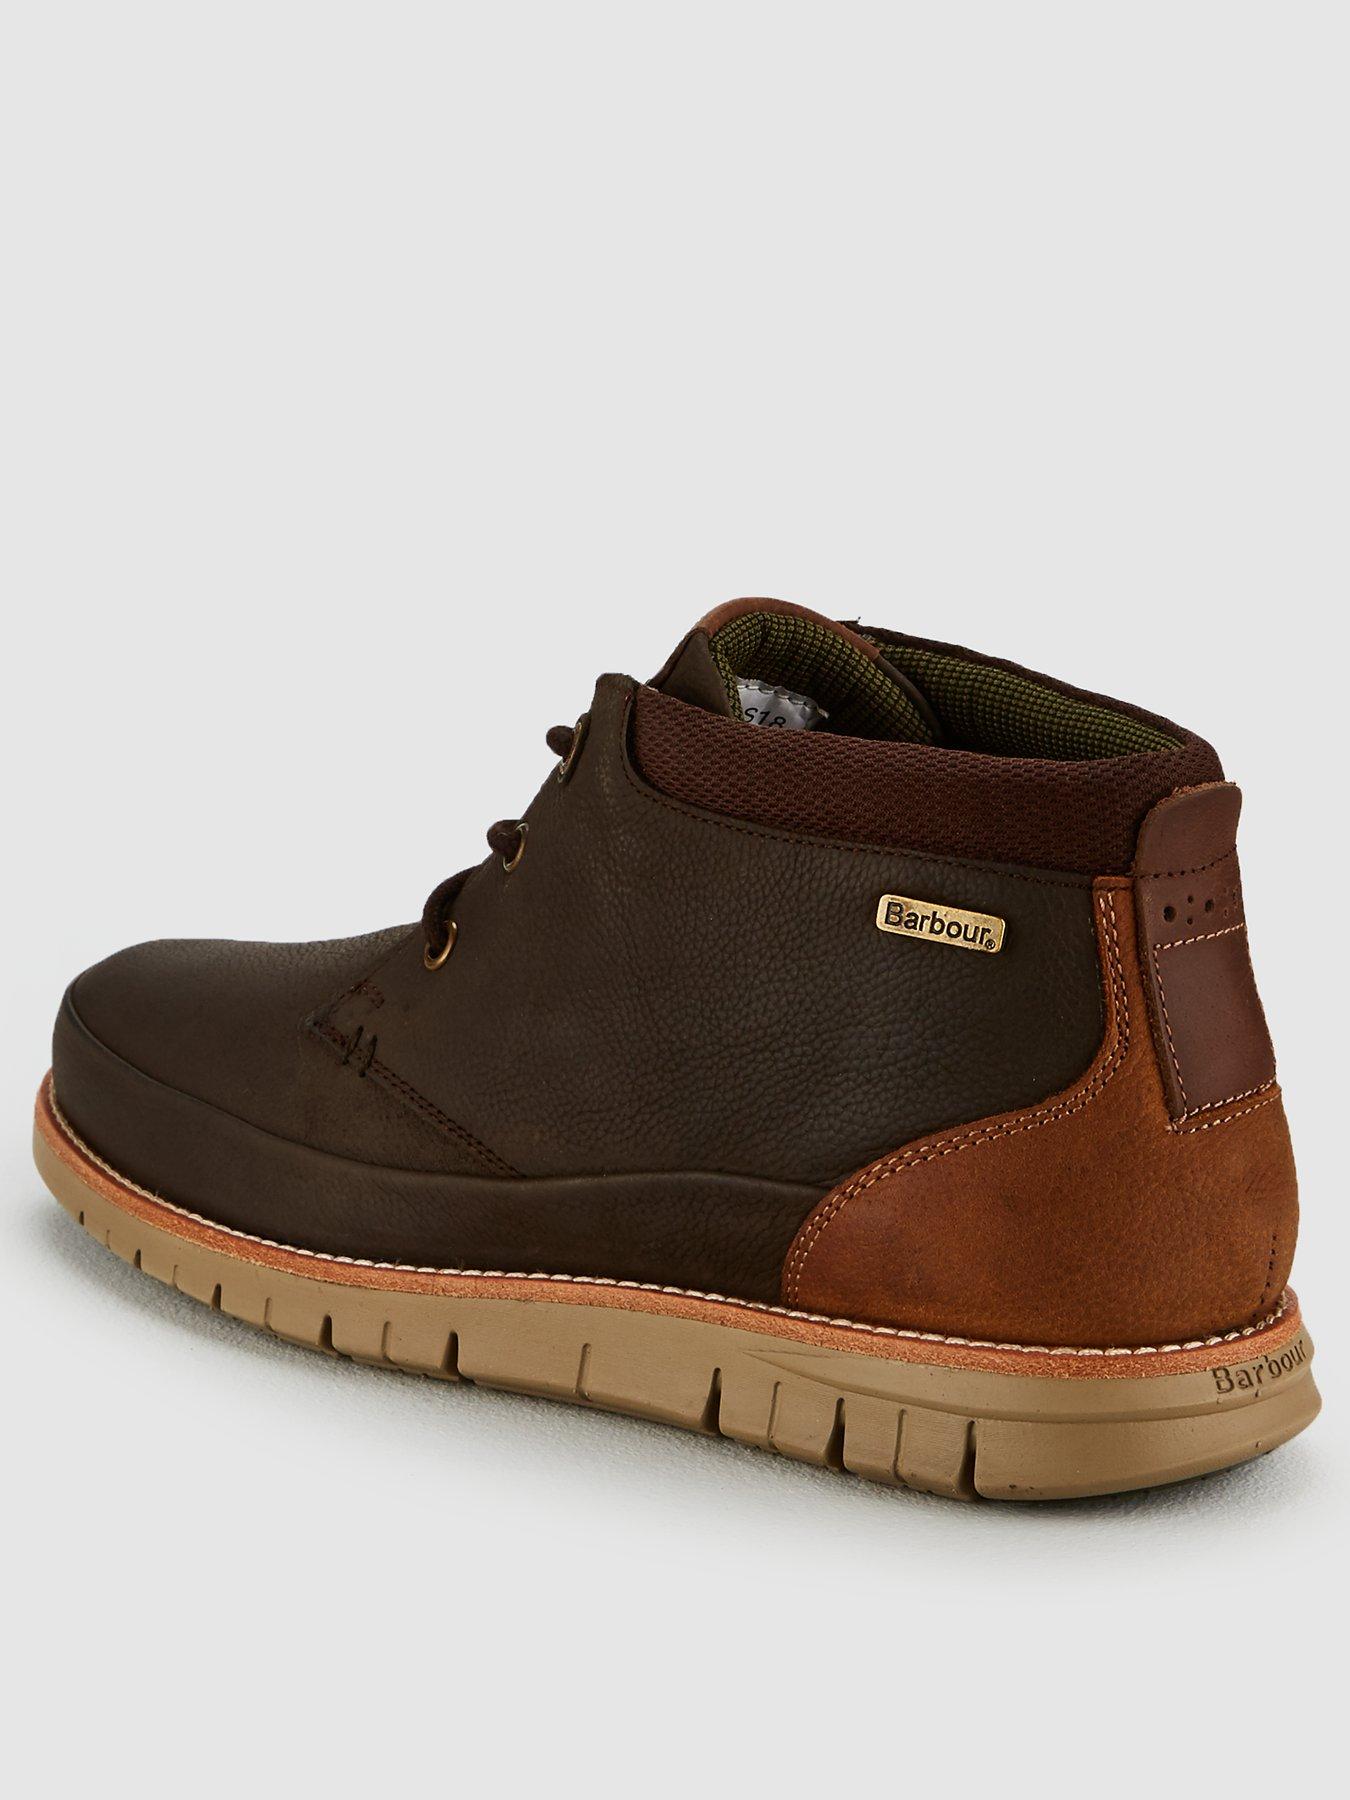 barbour boots uk